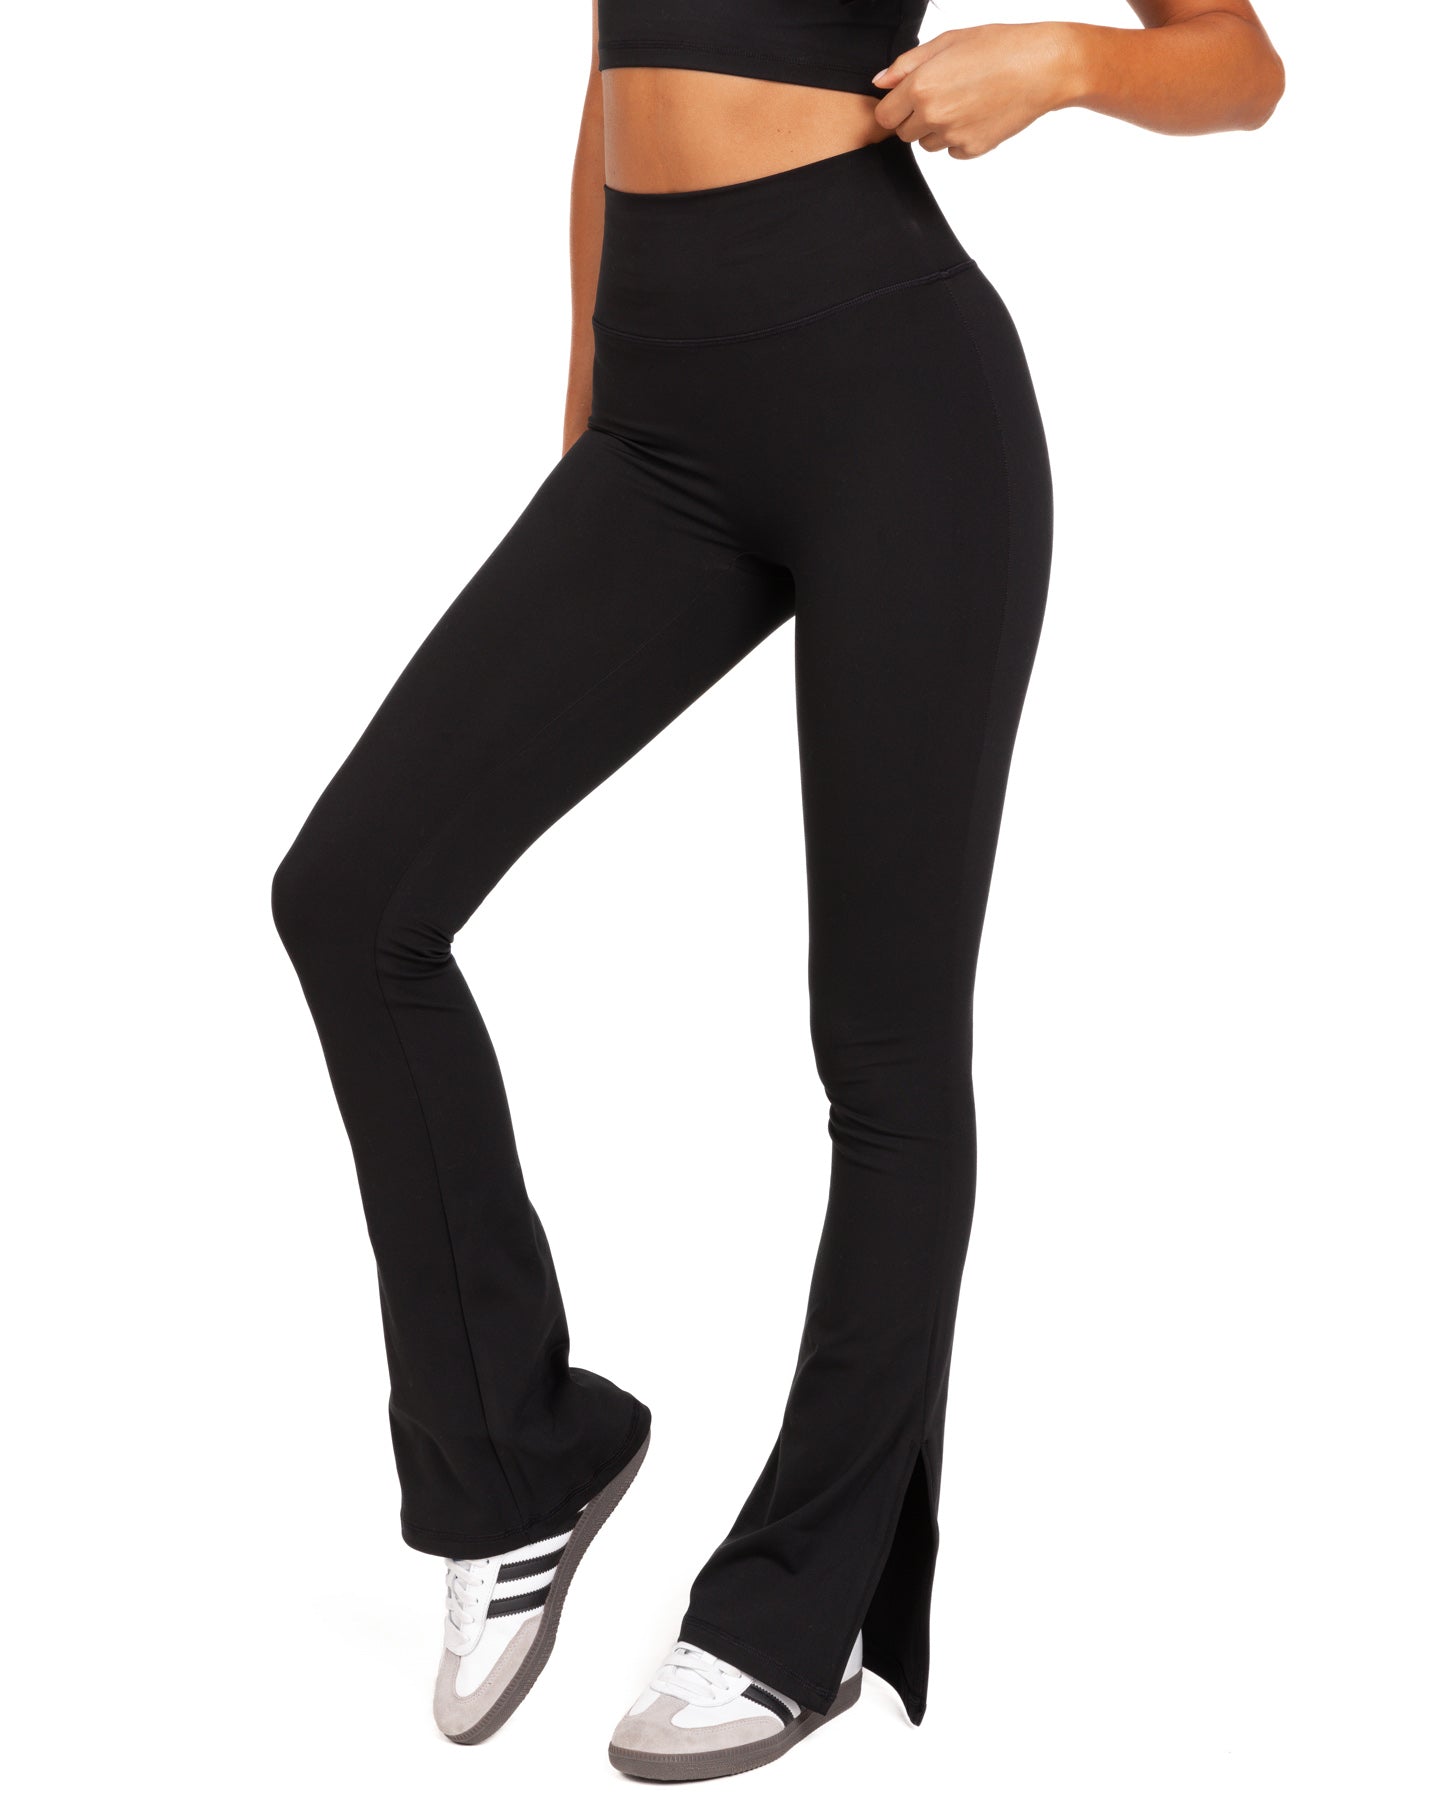 High-Waisted Flare Bottom Yoga Pants with Scrunch Detail • Value Yoga